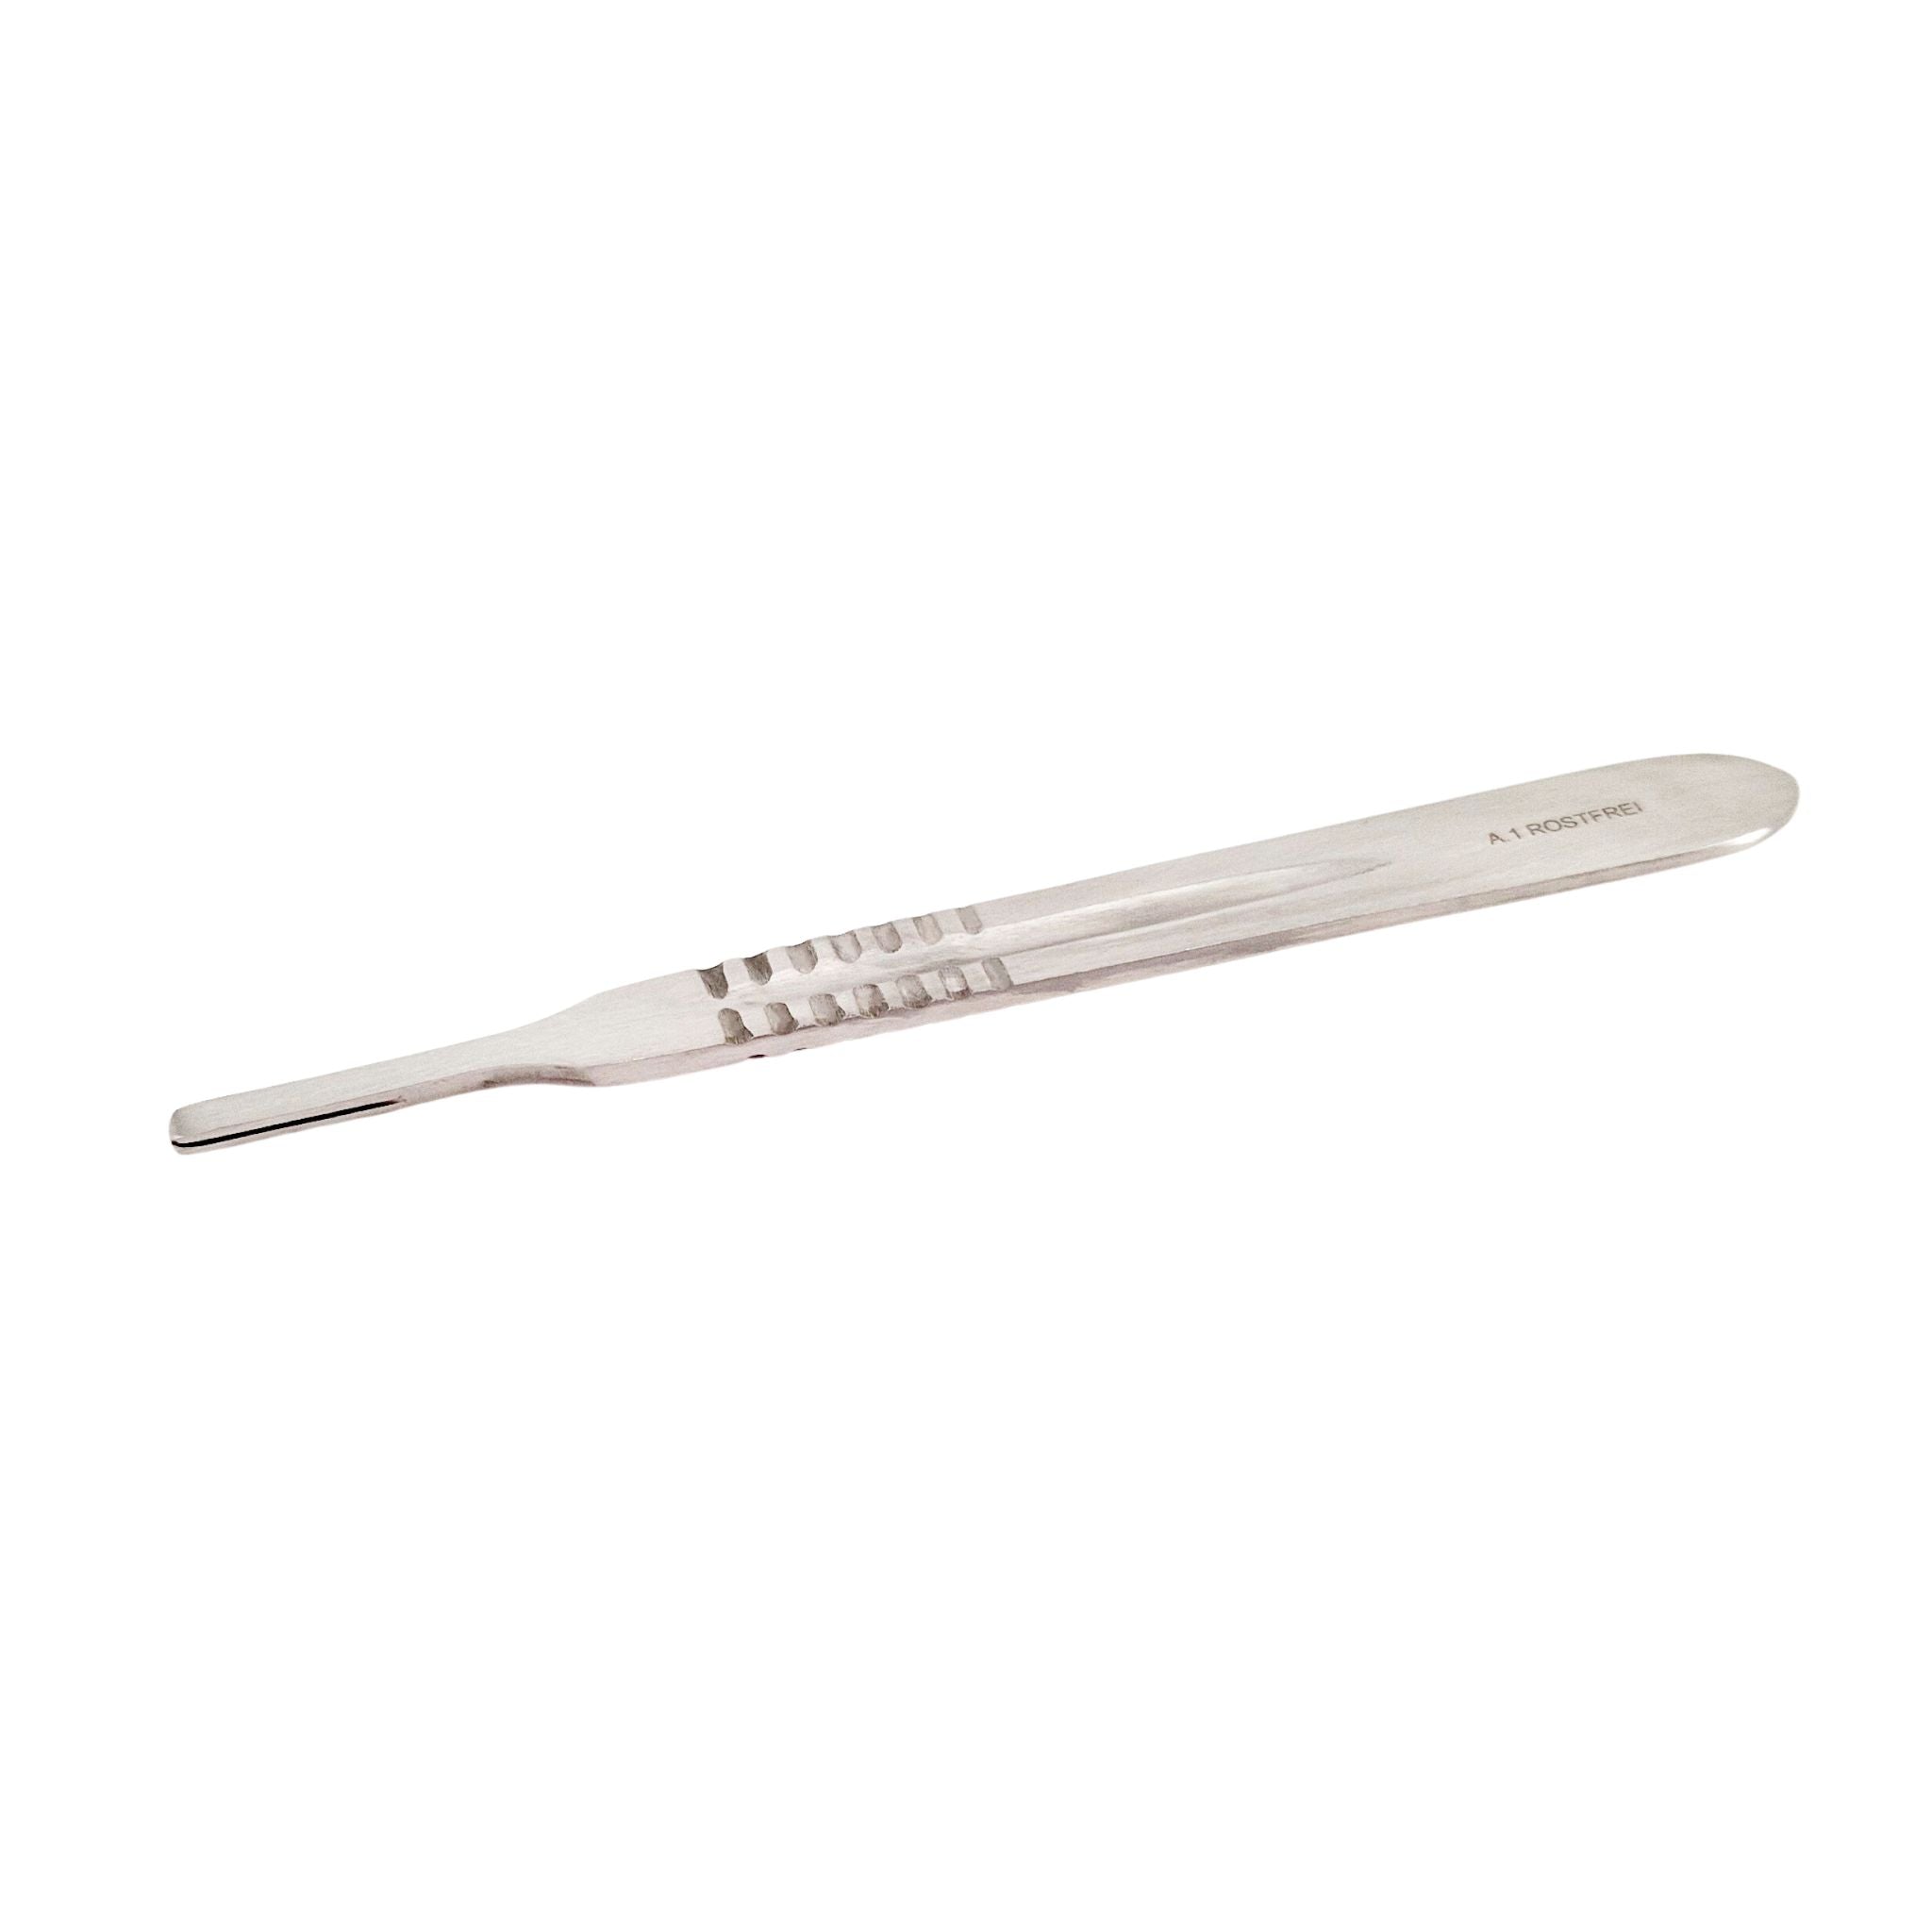 Lavabis scalpel handle size 4 stainless steel - 0